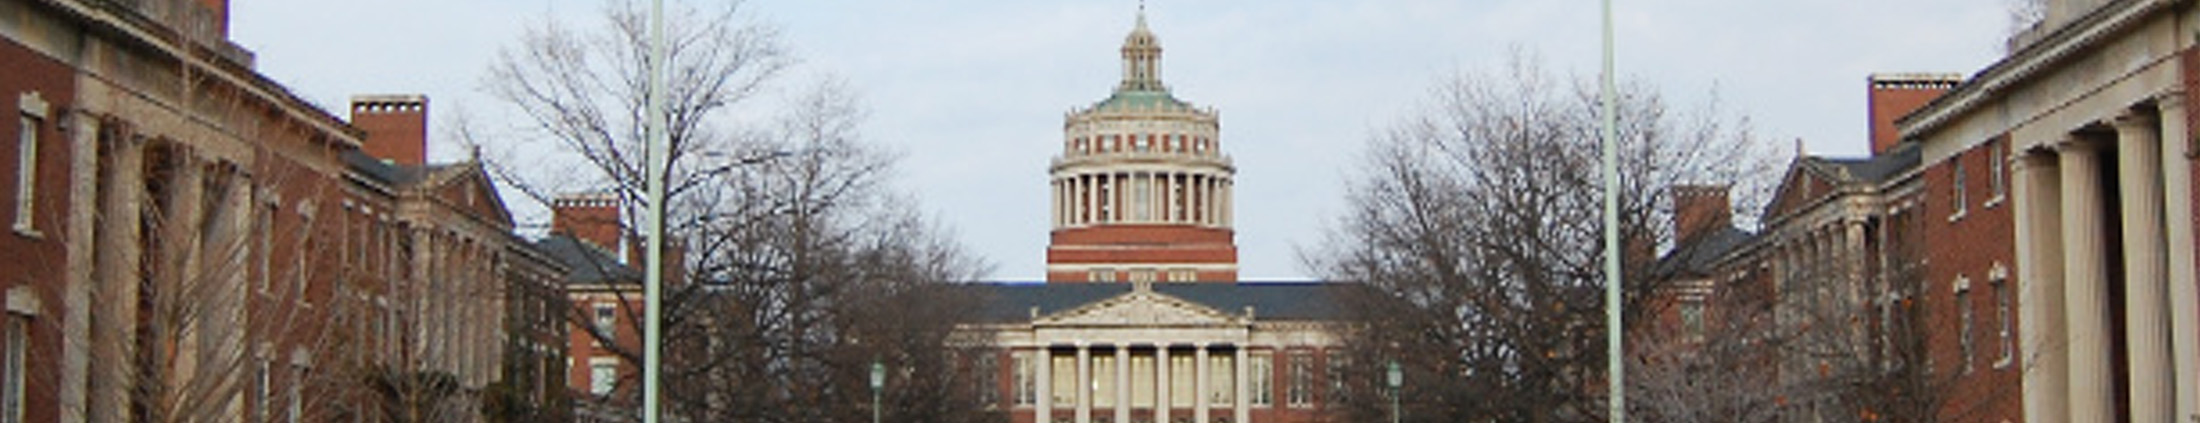 University of Rochester Campus photo.